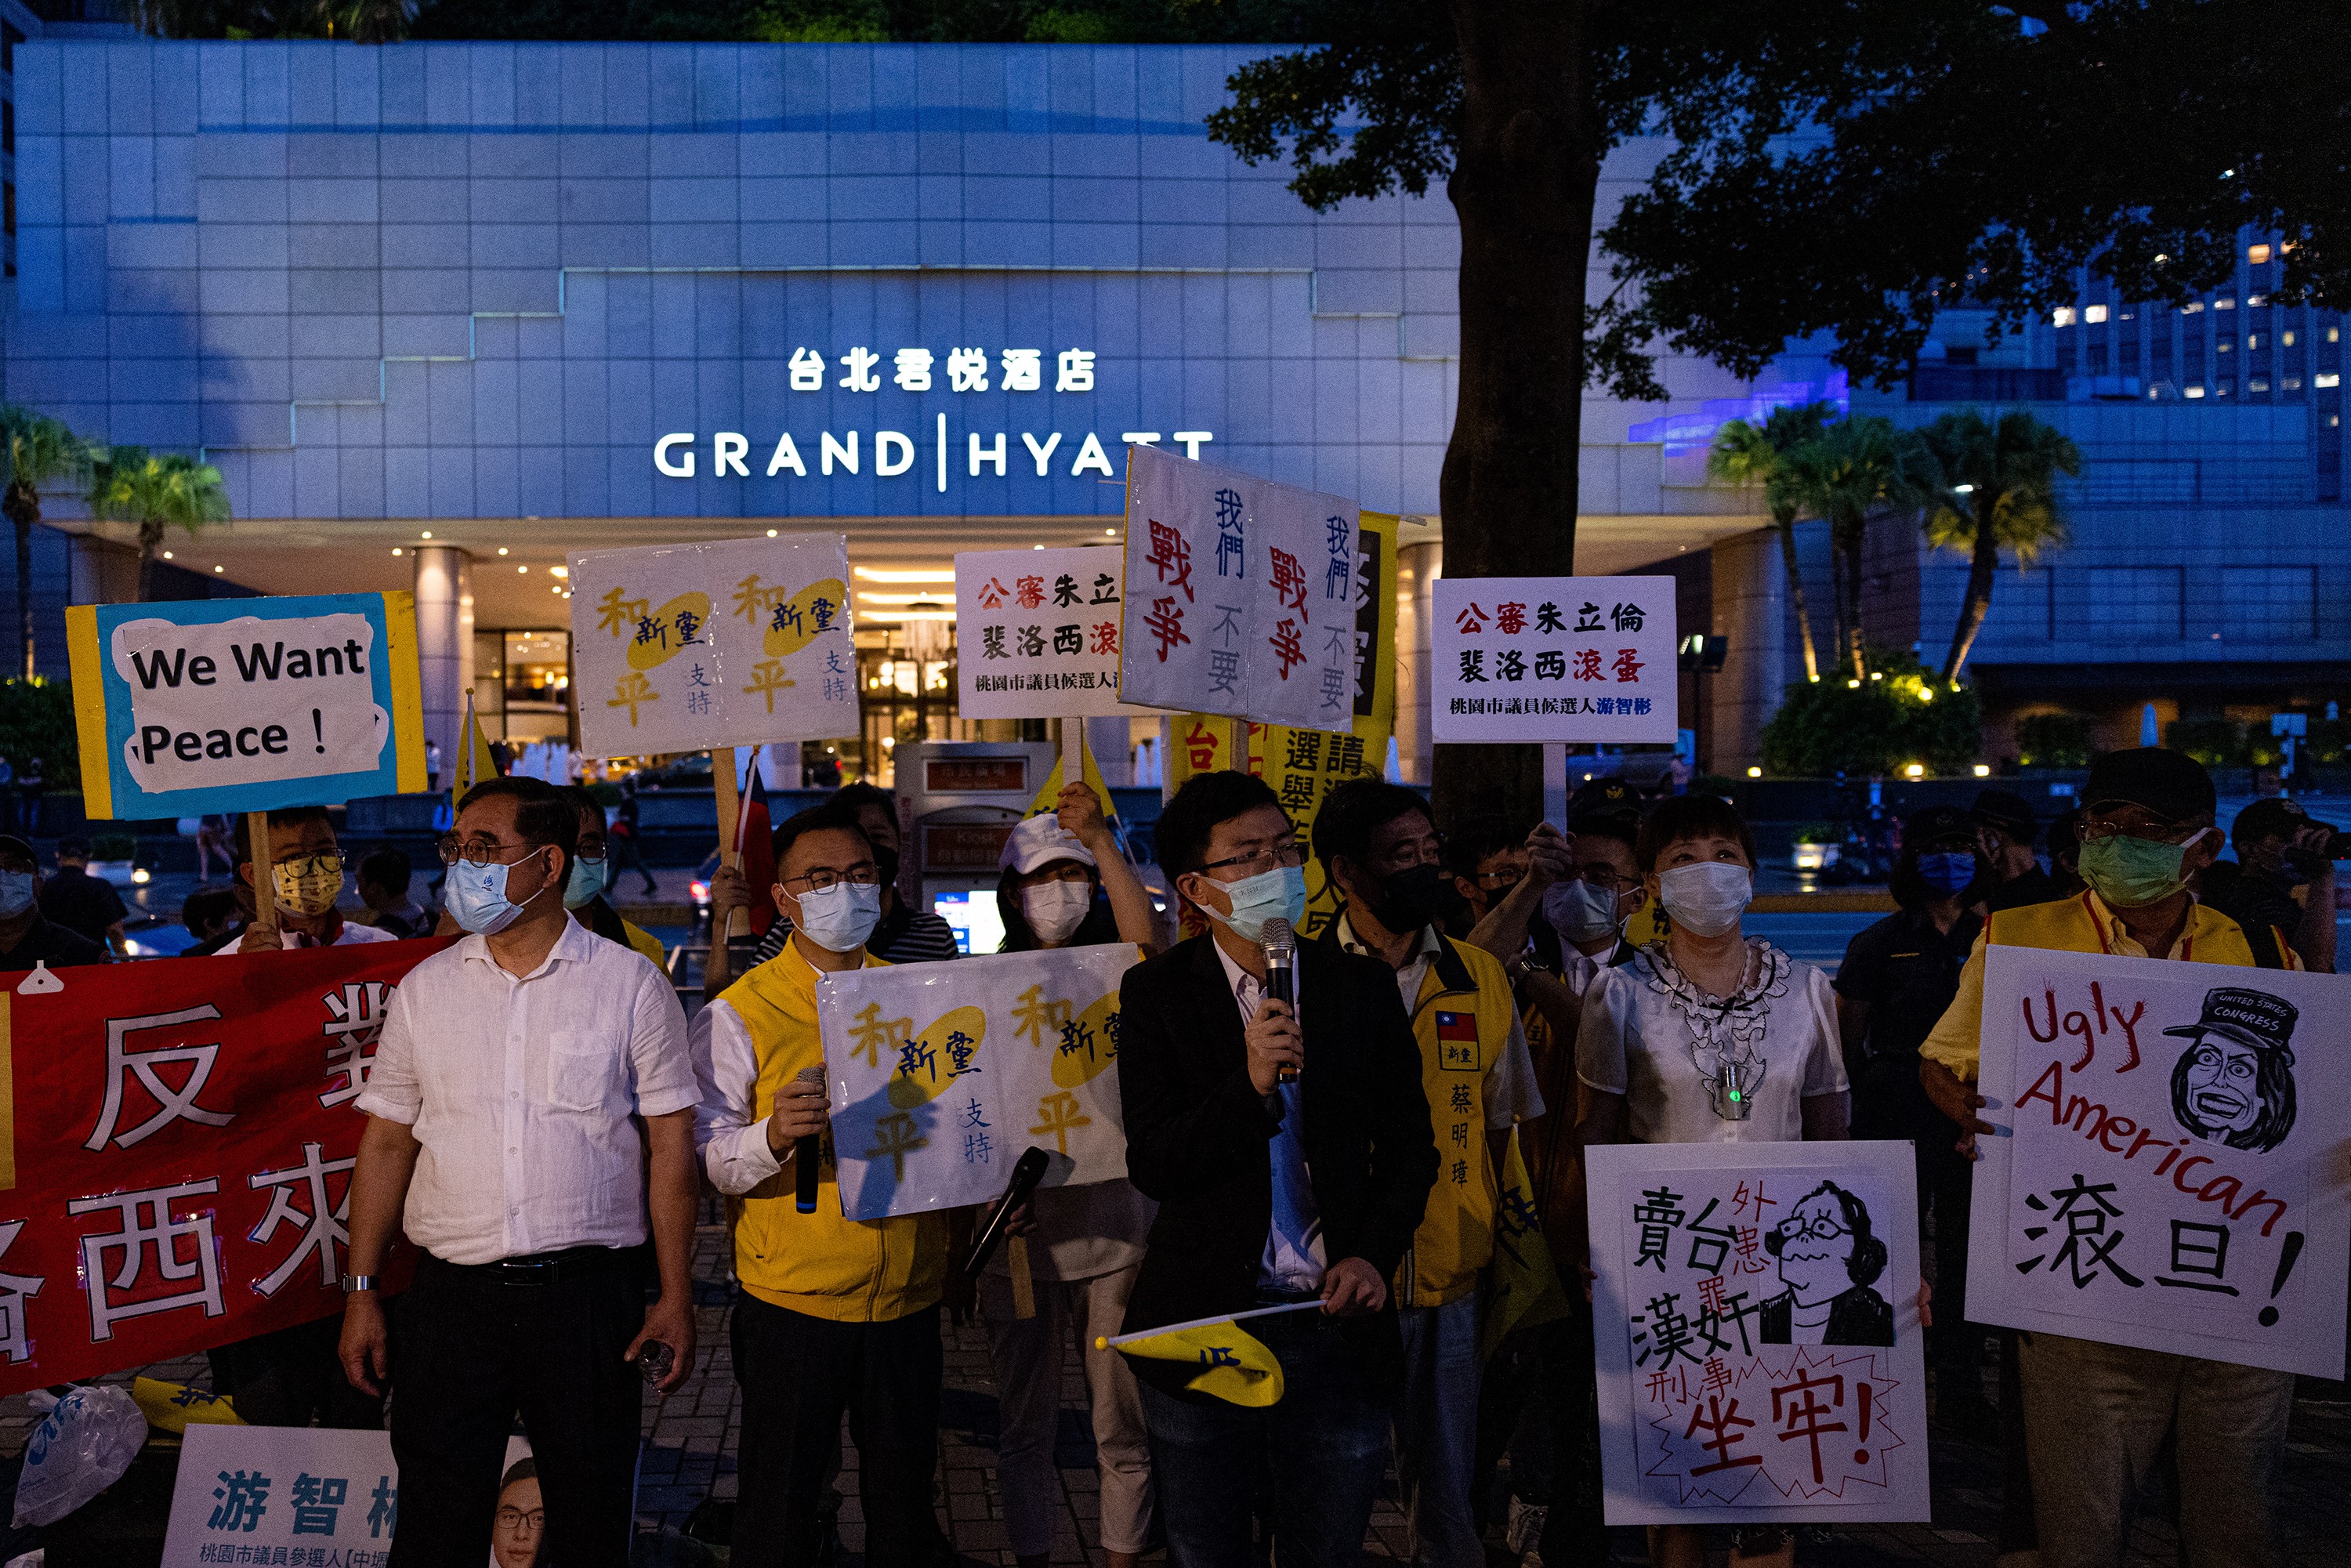 Demonstrators take part in a protest against US House Speaker Nancy Pelosi's visit on Tuesday night in Taipei, Taiwan, outside the Grand Hyatt Taipei hotel.